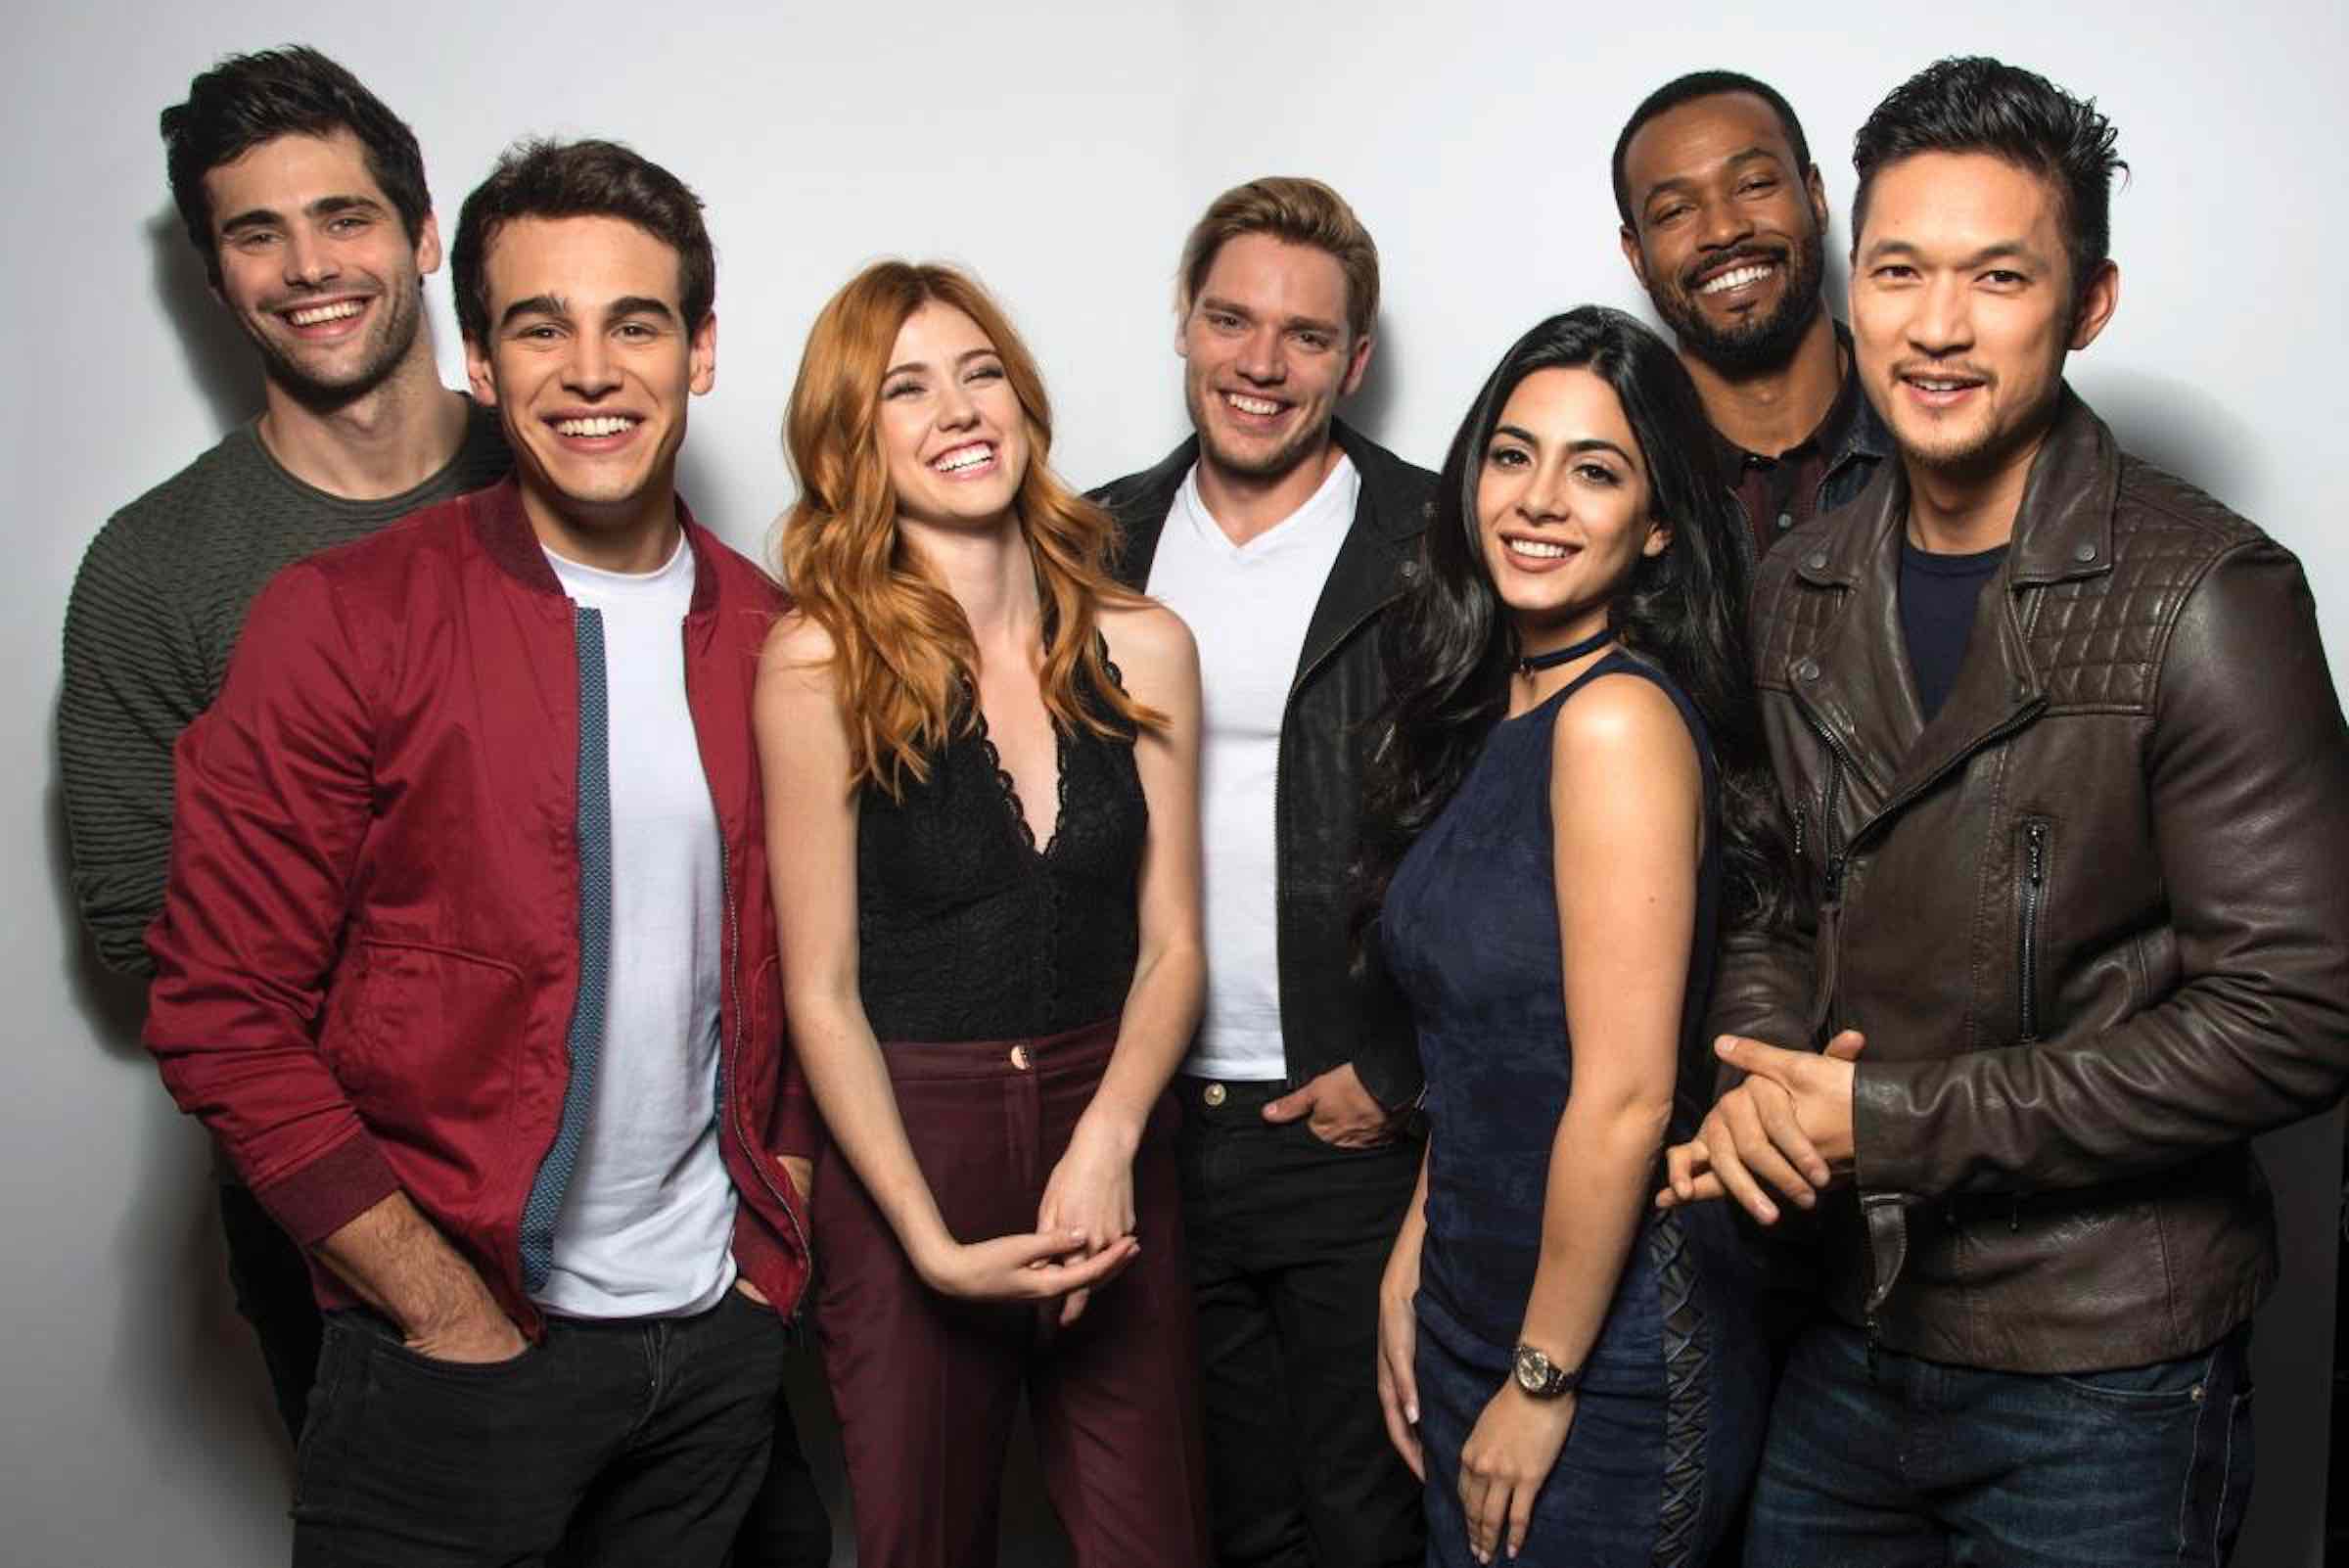 'Shadowhunters' is gone but not forgotten thanks to the committed Shadowfam. Here's why they deserve your votes for best fandom in our Bingewatch Awards.